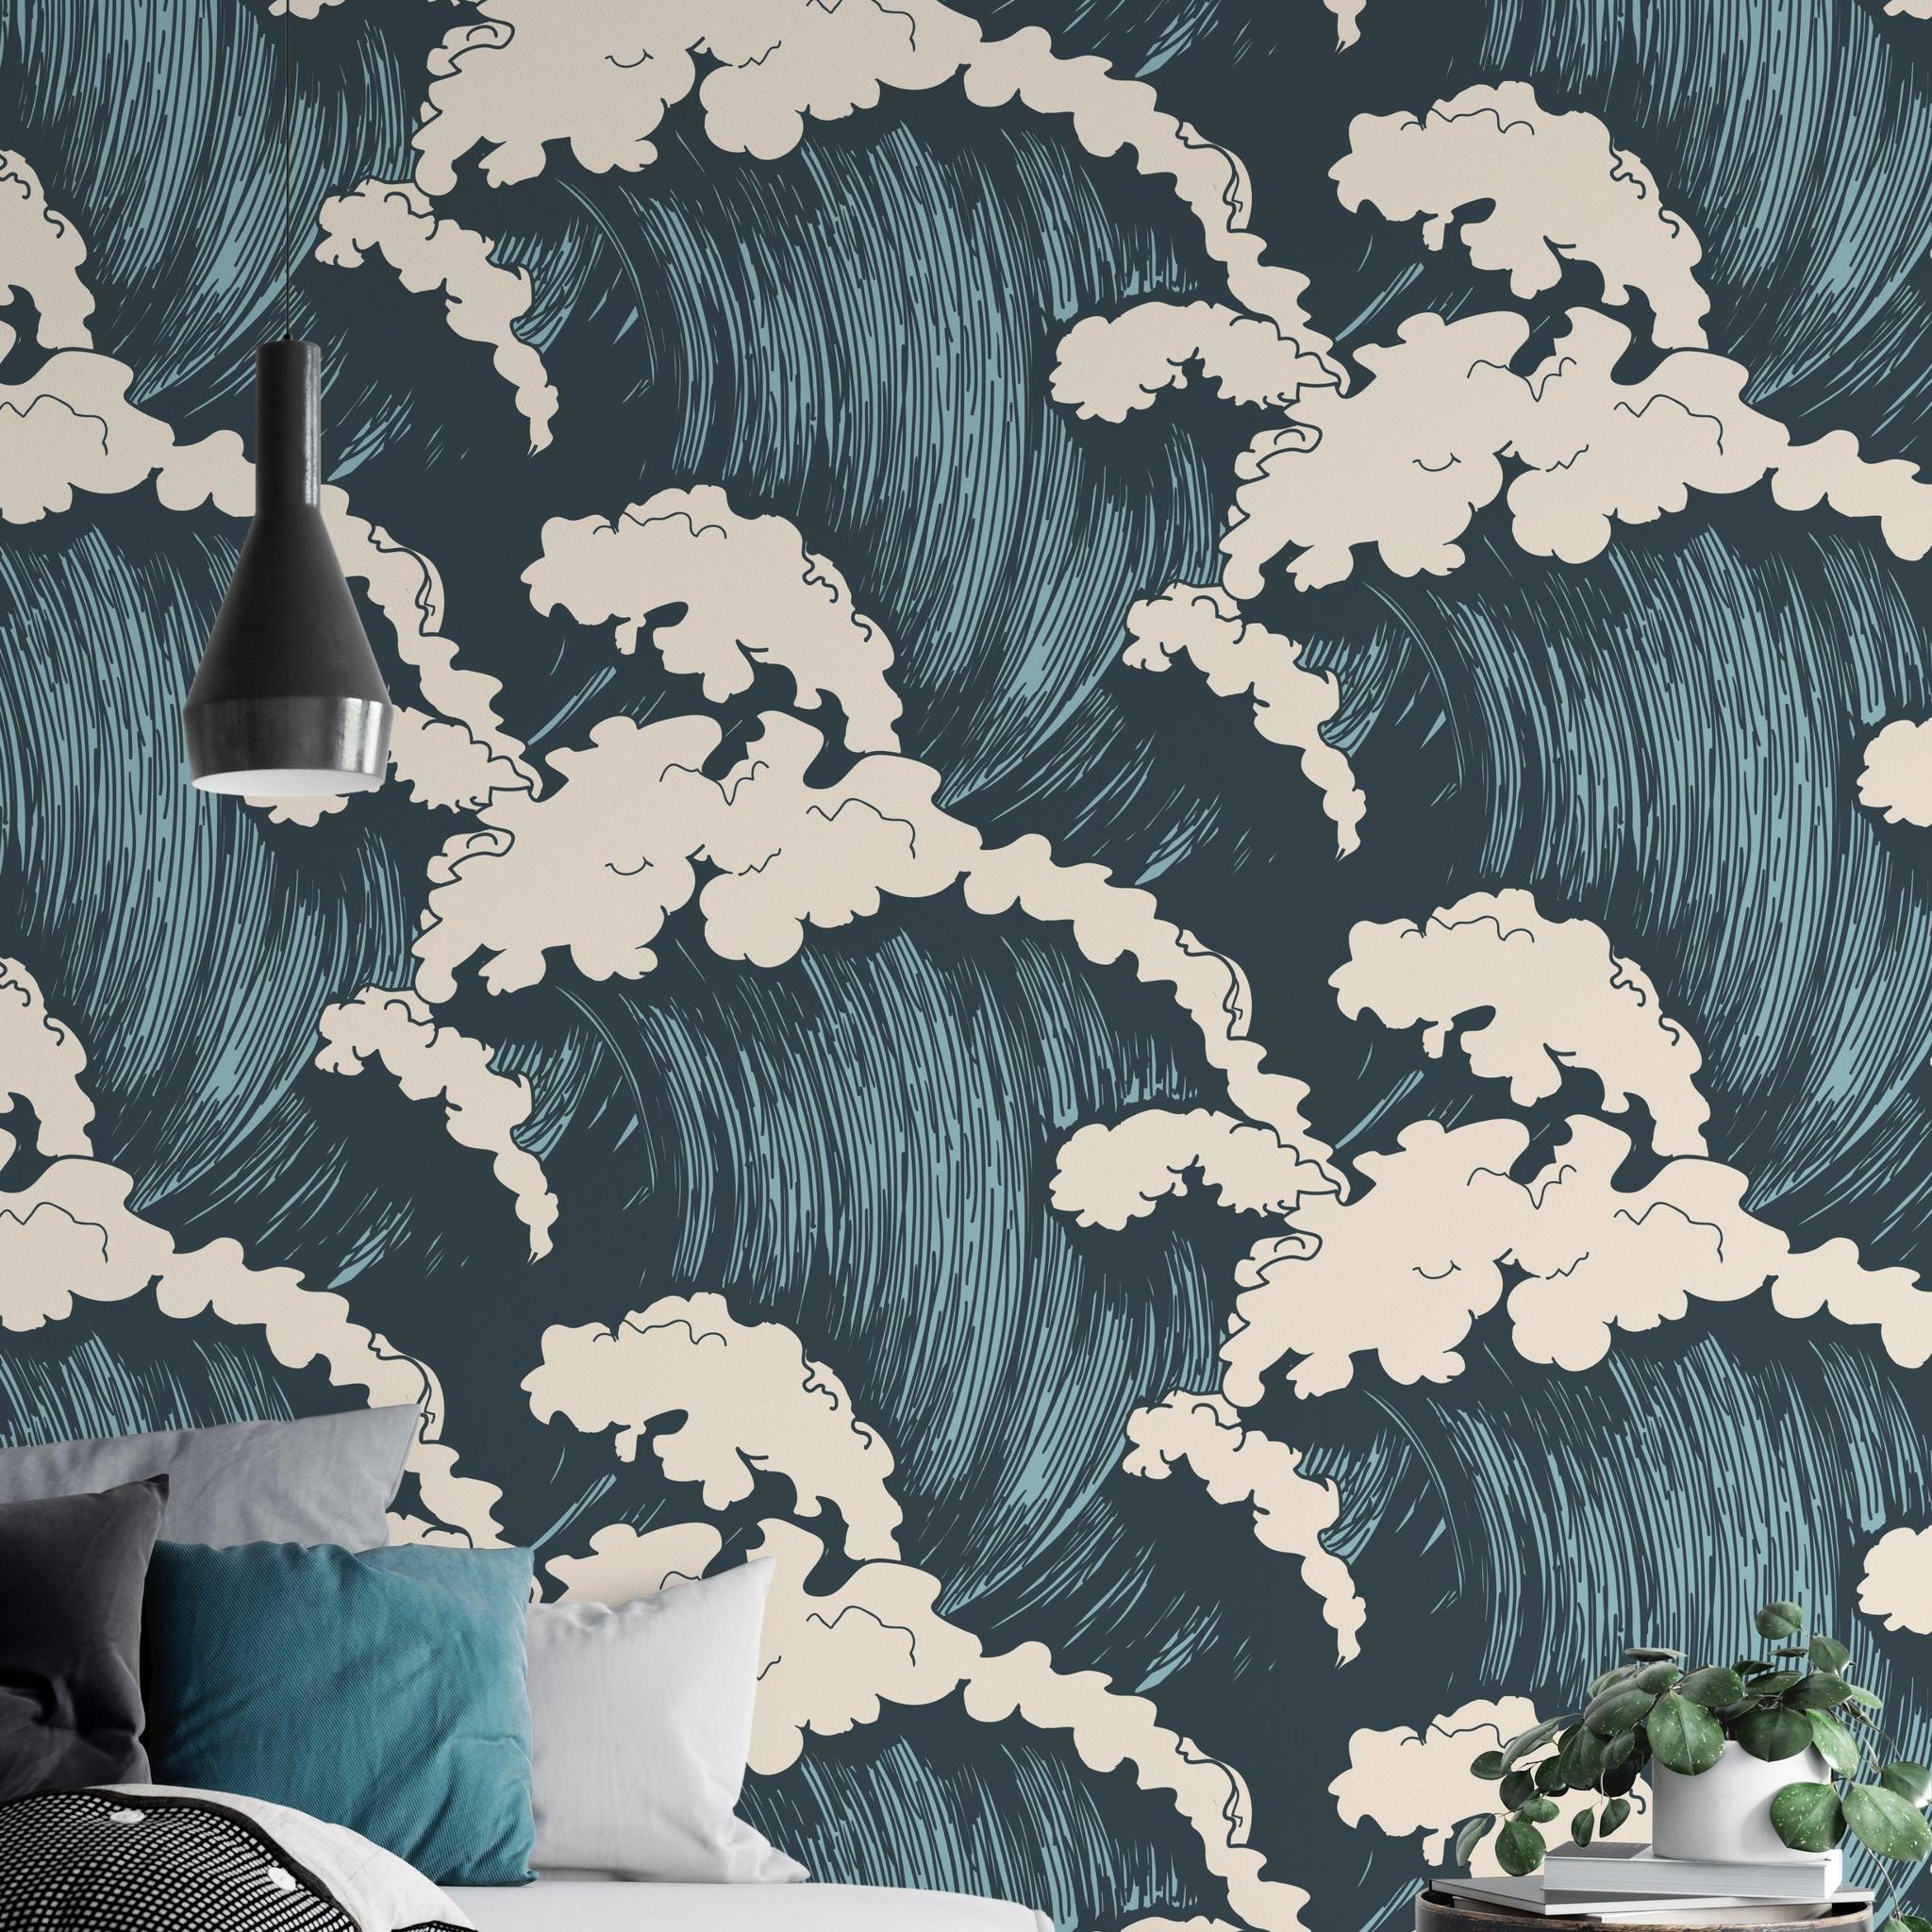 Maverick Wallpaper from Wall Blush SG02 enhancing a modern living room ambiance with stylish wall accent.
